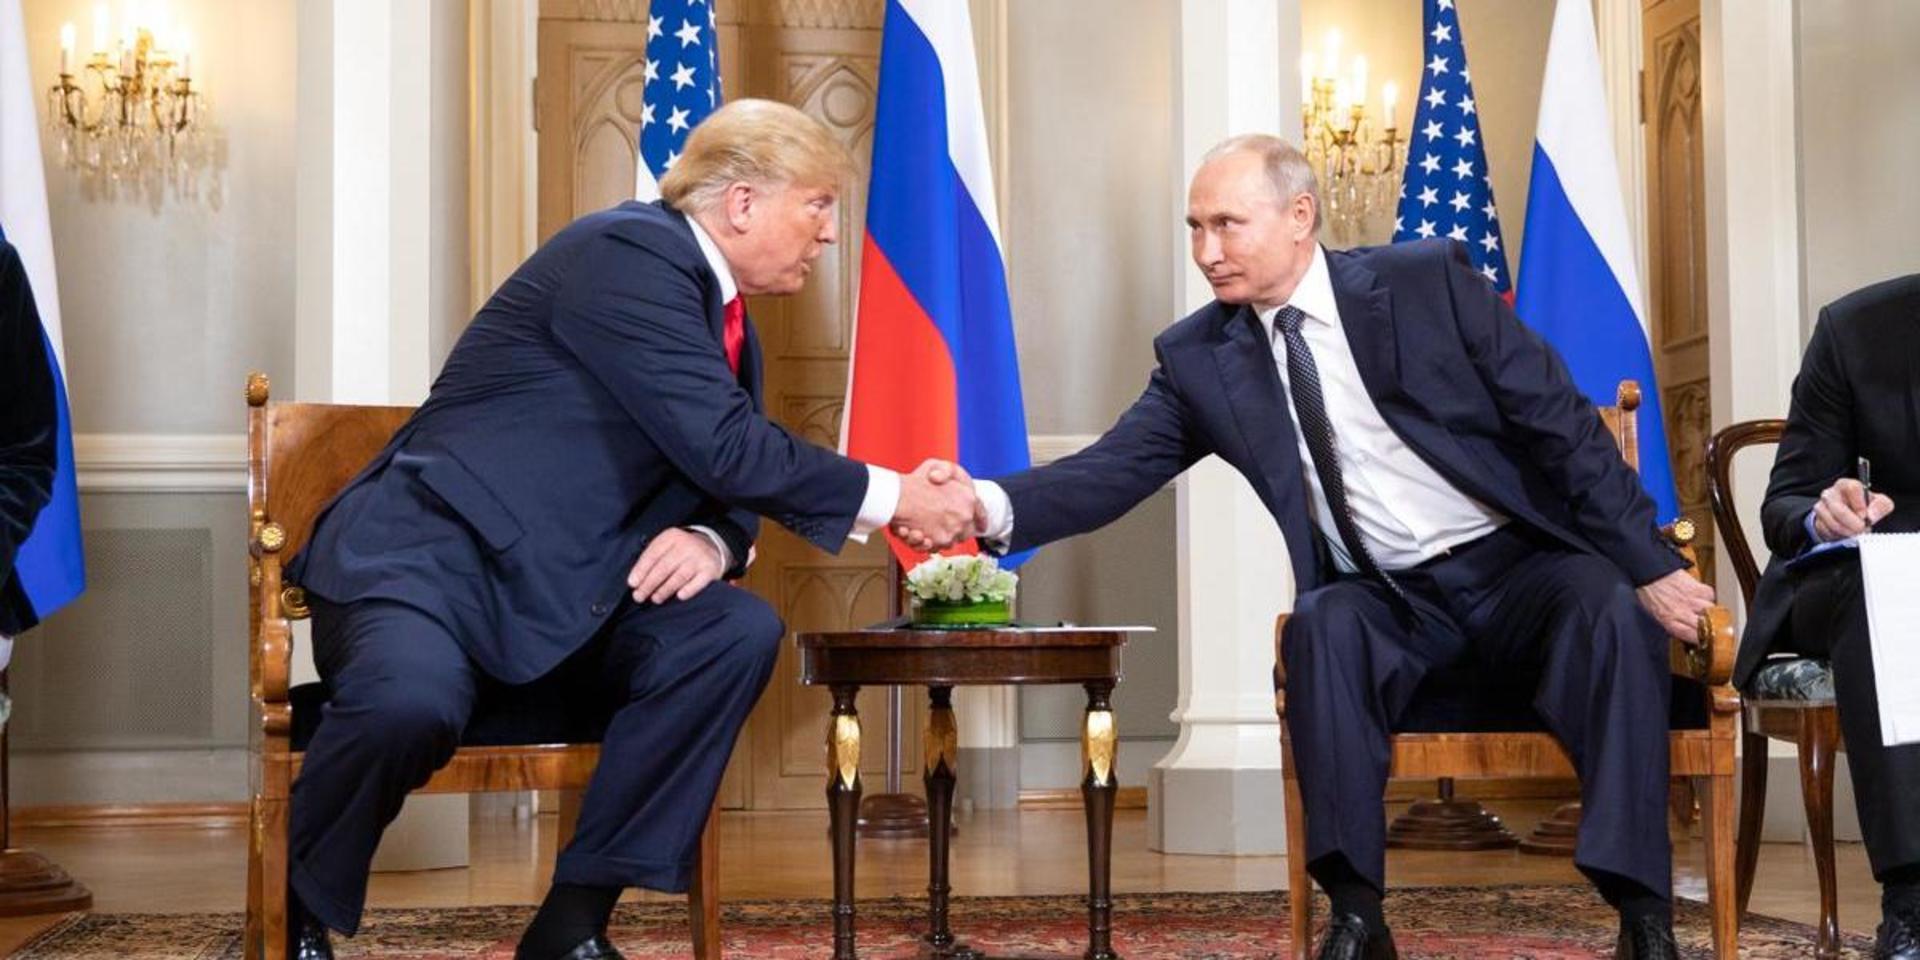 President Donald J. Trump and President Vladimir Putin of the Russian Federation | July 16, 2018 (Official White House Photo by Shealah Craighead)